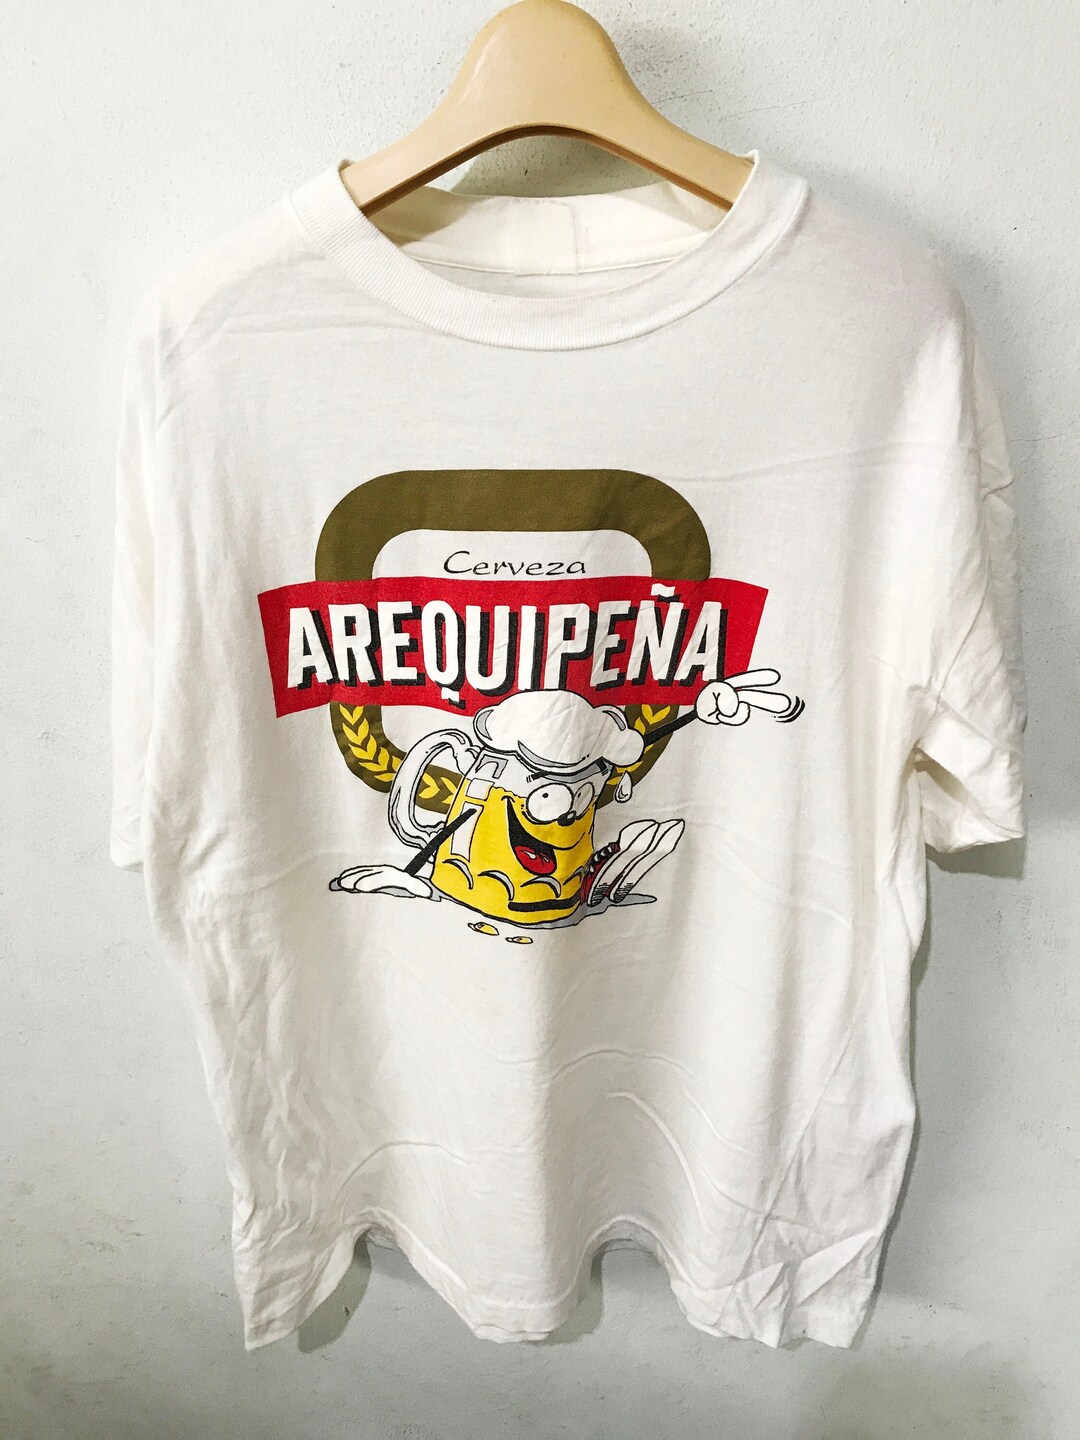 Vintage Cerveza Arequipena Beer Shirt Size M Free Shipping - Etsy